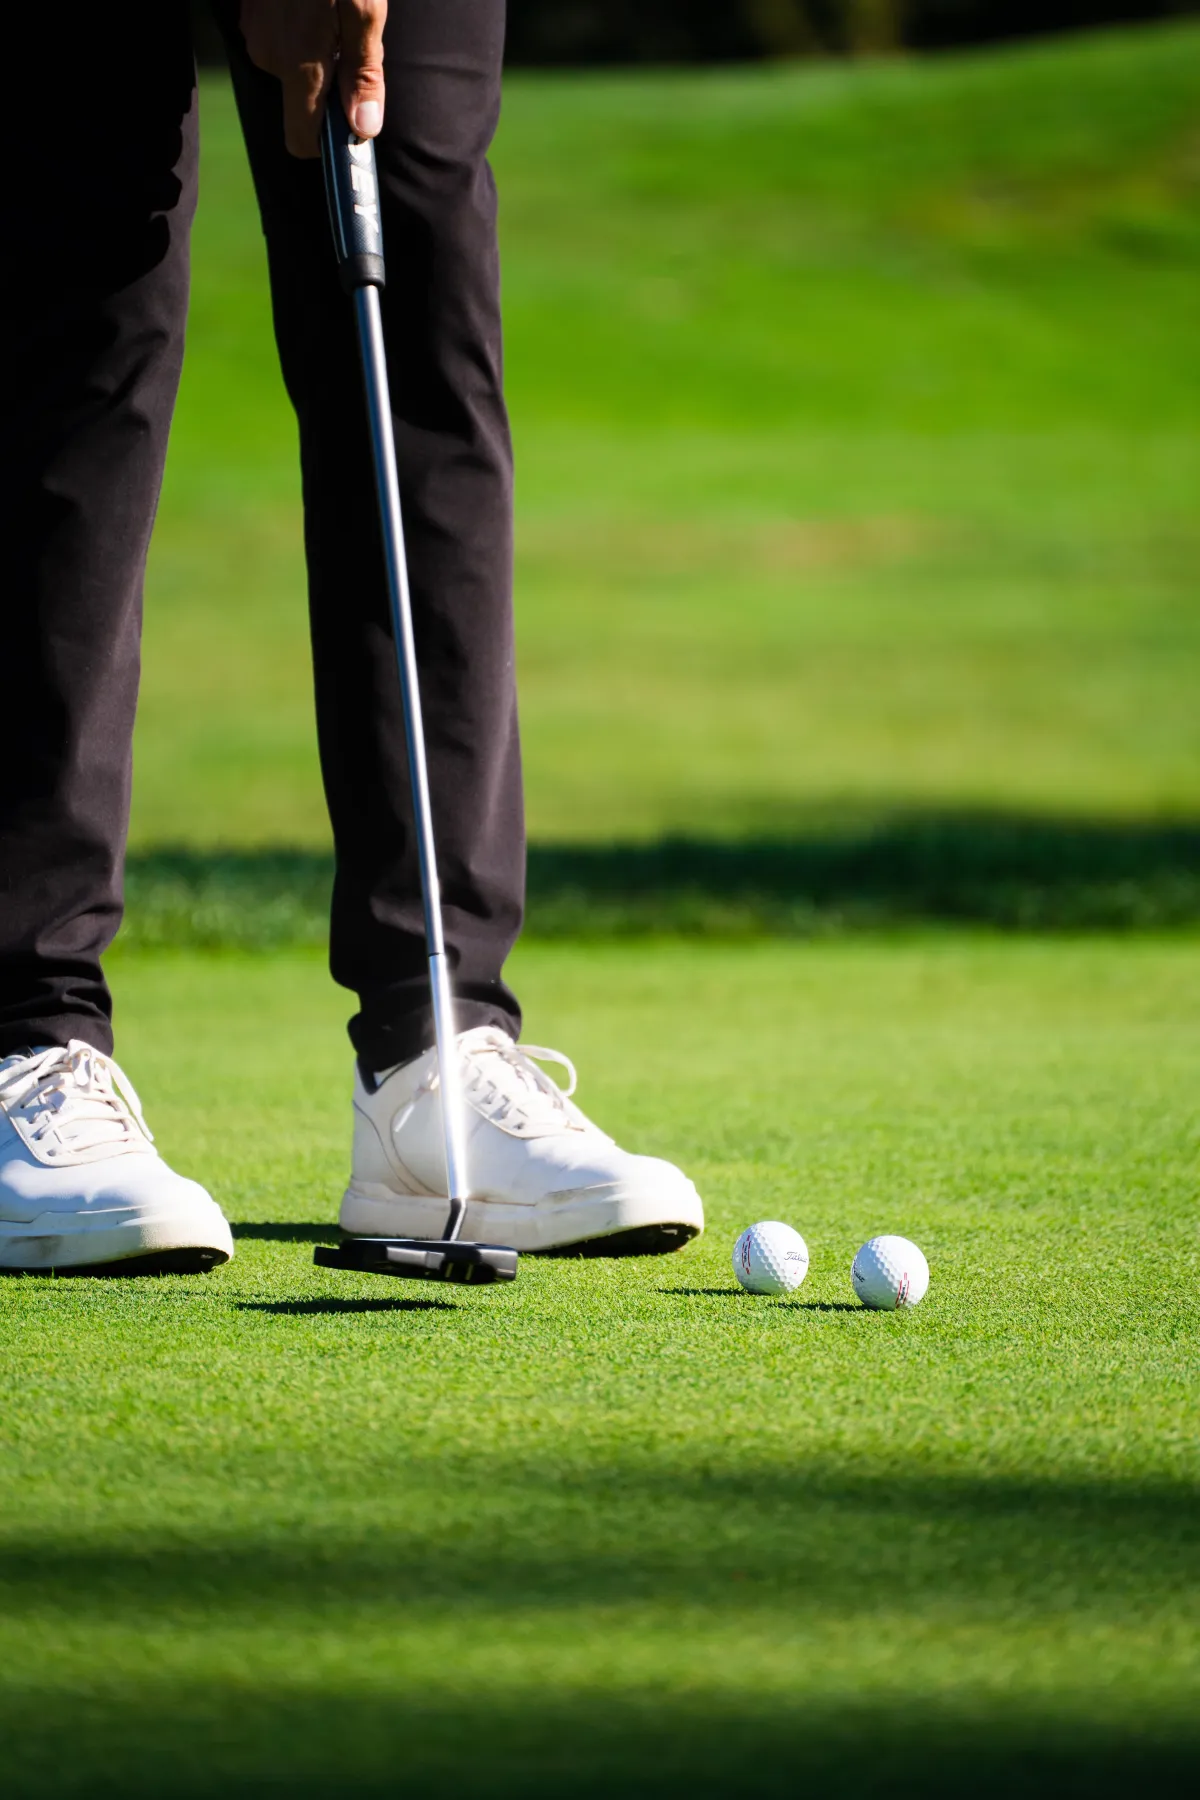 A golfer practices his putting on the green at a charity golf event in Vancouver. 